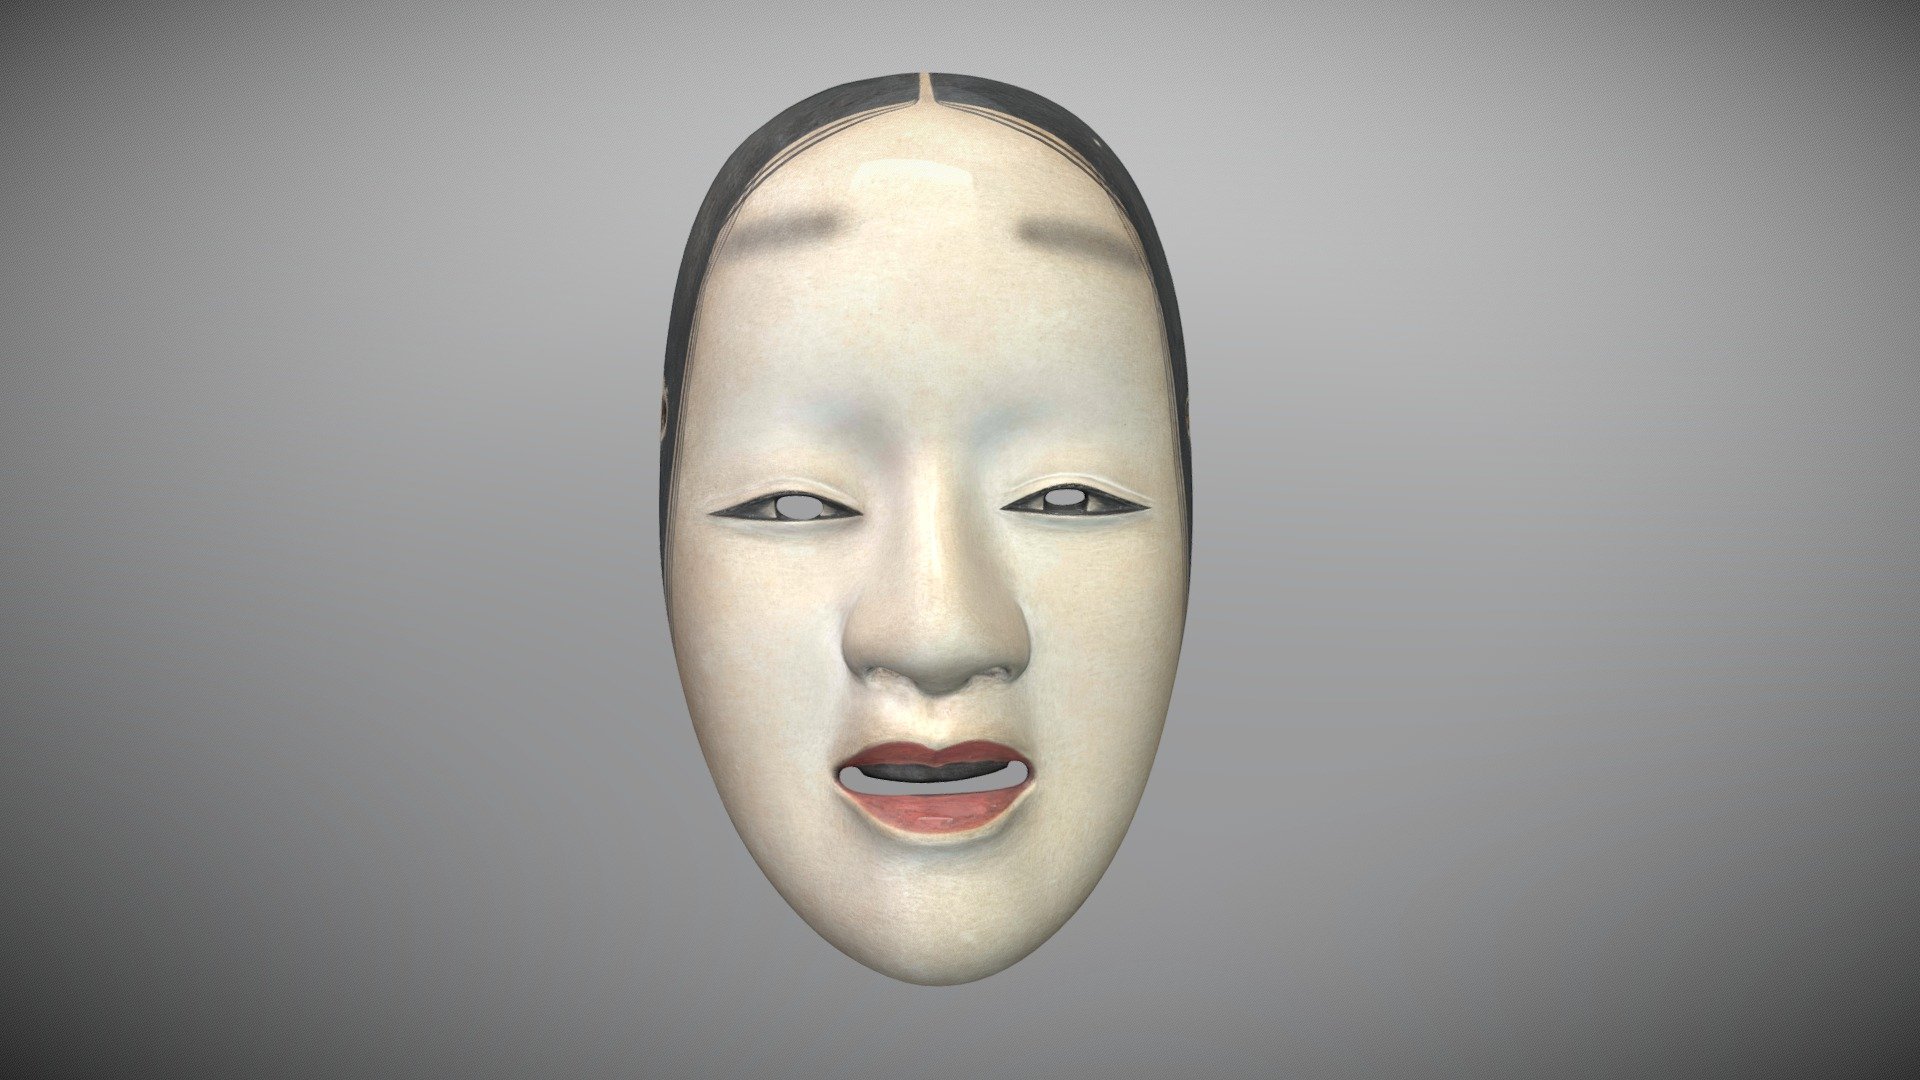 This mask is used in the Noh play entitled Hagoromo (羽衣) by Katayama Kuroemon X of the Kanze (観世) school of Noh.

It was scanned in 2017 for the NOxAR exhibition at Rohm Theater in Kyoto, Japan by KYOTO VR, as part of Kyoto Project, a collaboration between Kyoto City, the Japanese Ministry of Culture to blend technology with Japanese traditional arts - Noh Mask: Hagoromo - 3D model by KyotoVR 3d model